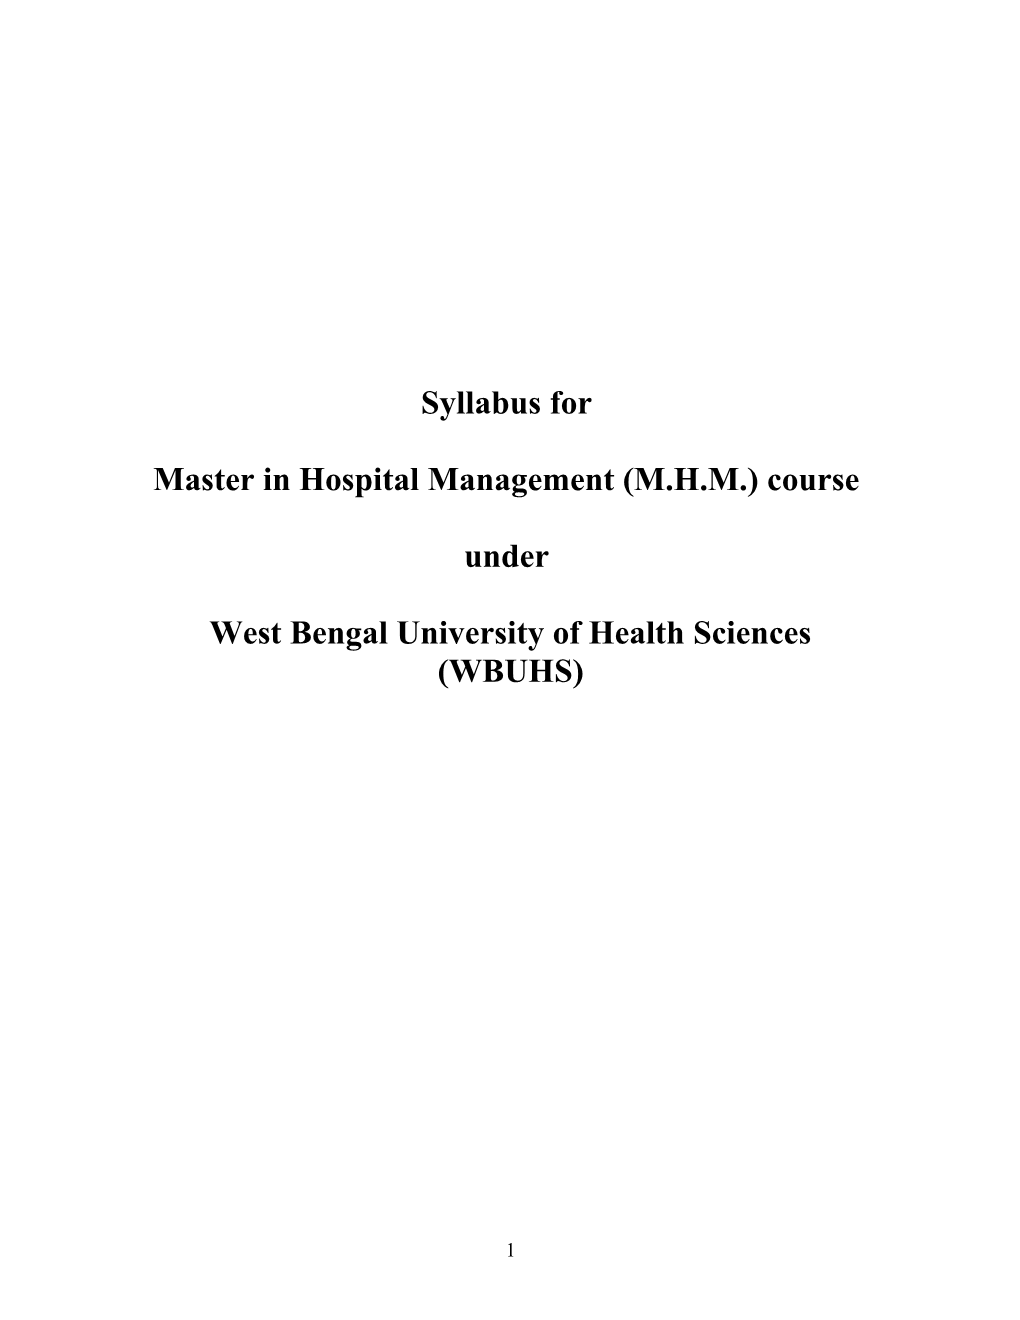 Master in Hospital Management (M.H.M.) Course